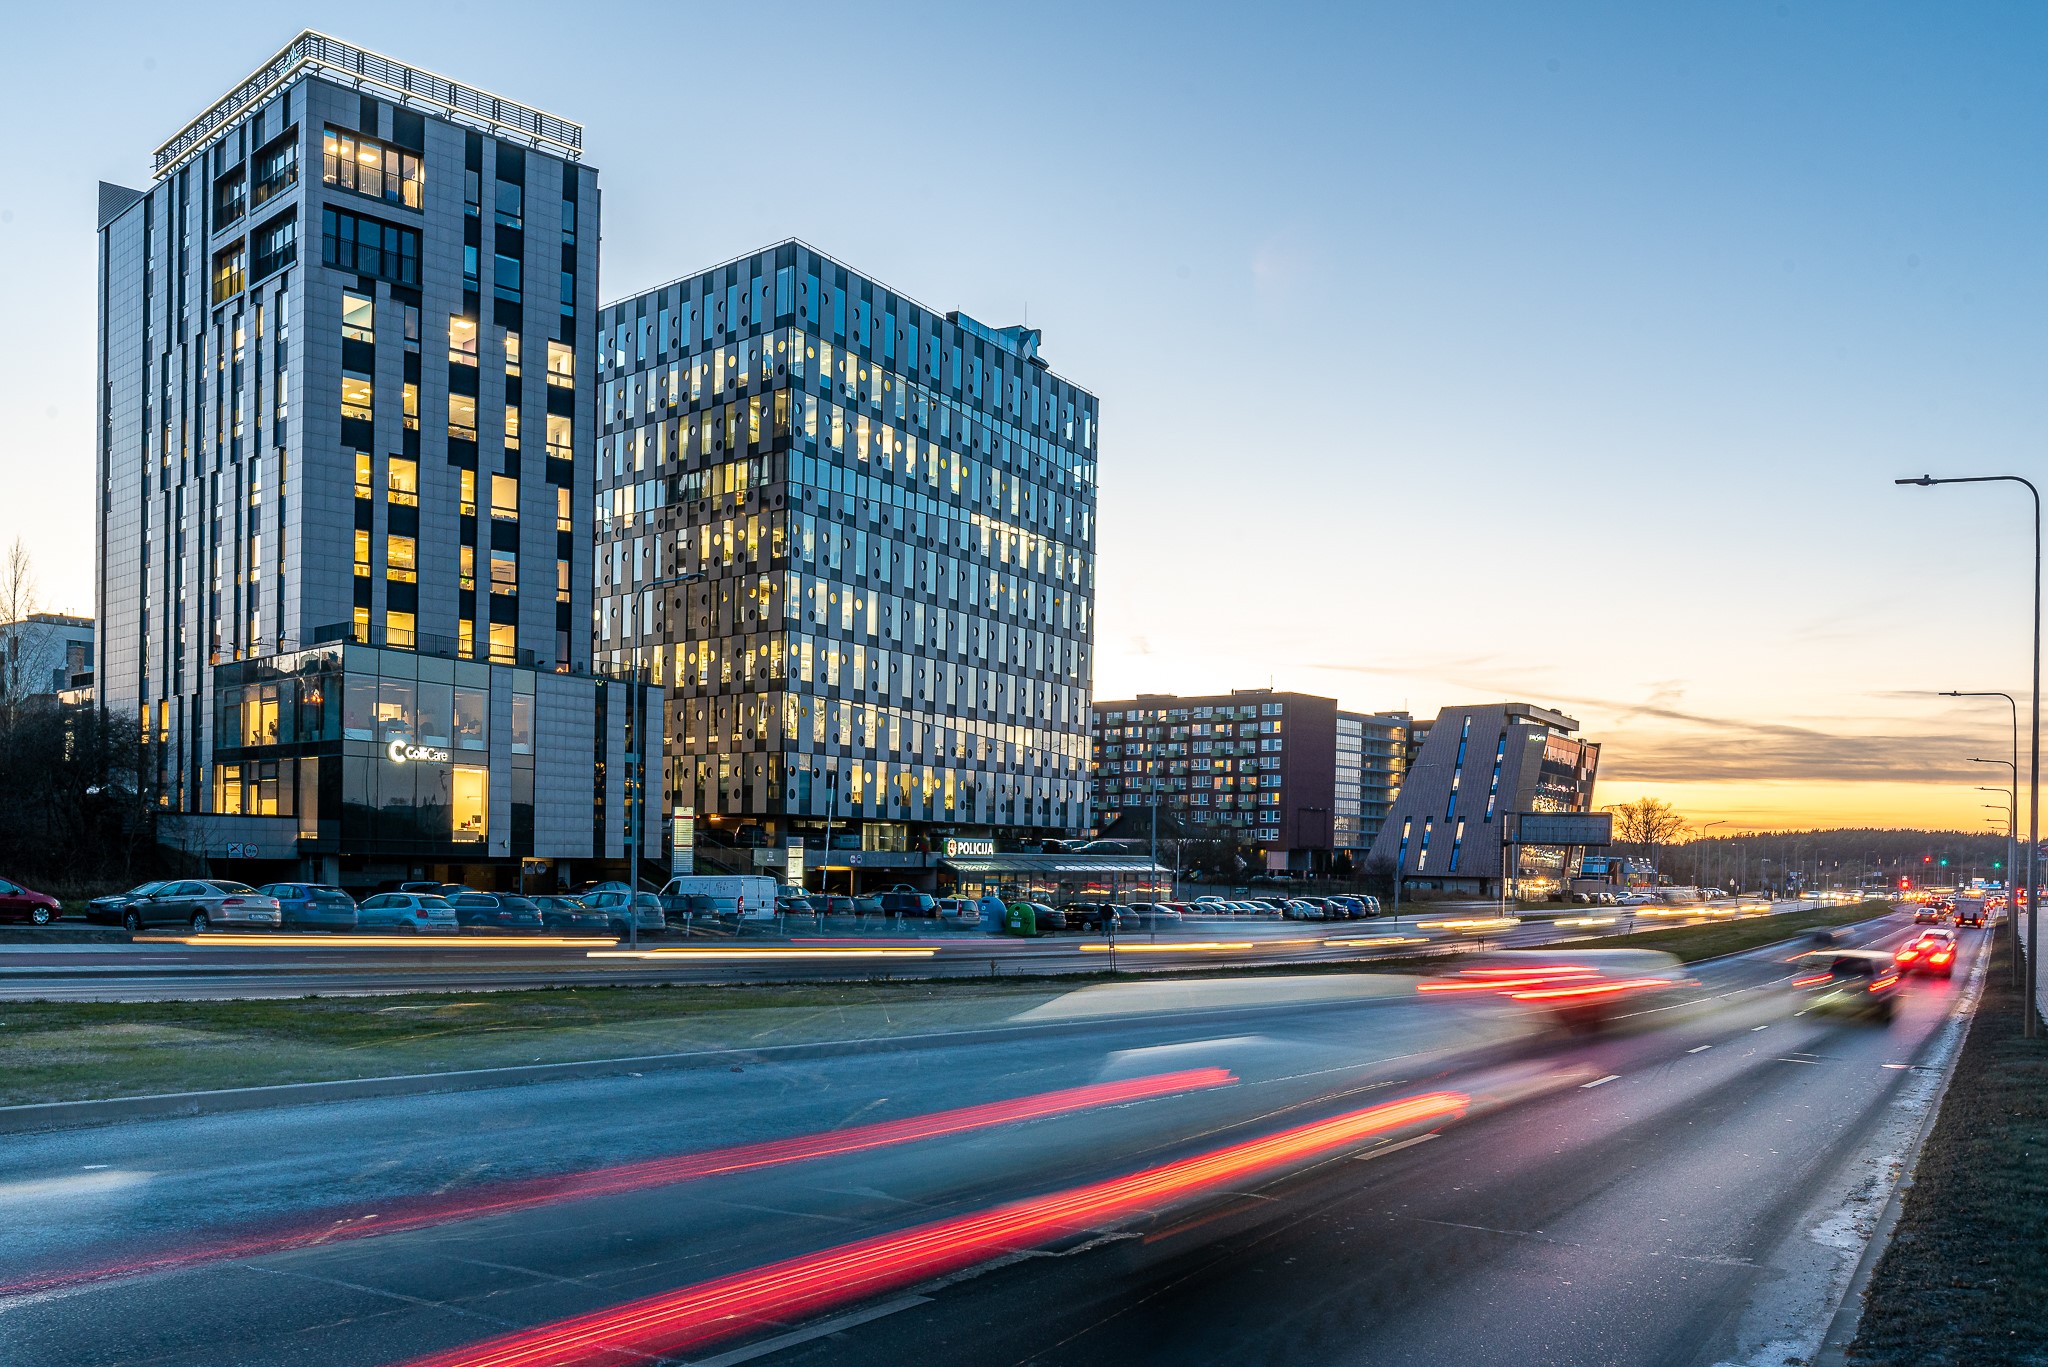 East Capital Real Estate’s Baltic Property Fund has sold the Jin business centre in Vilnius, Lithuania cover image